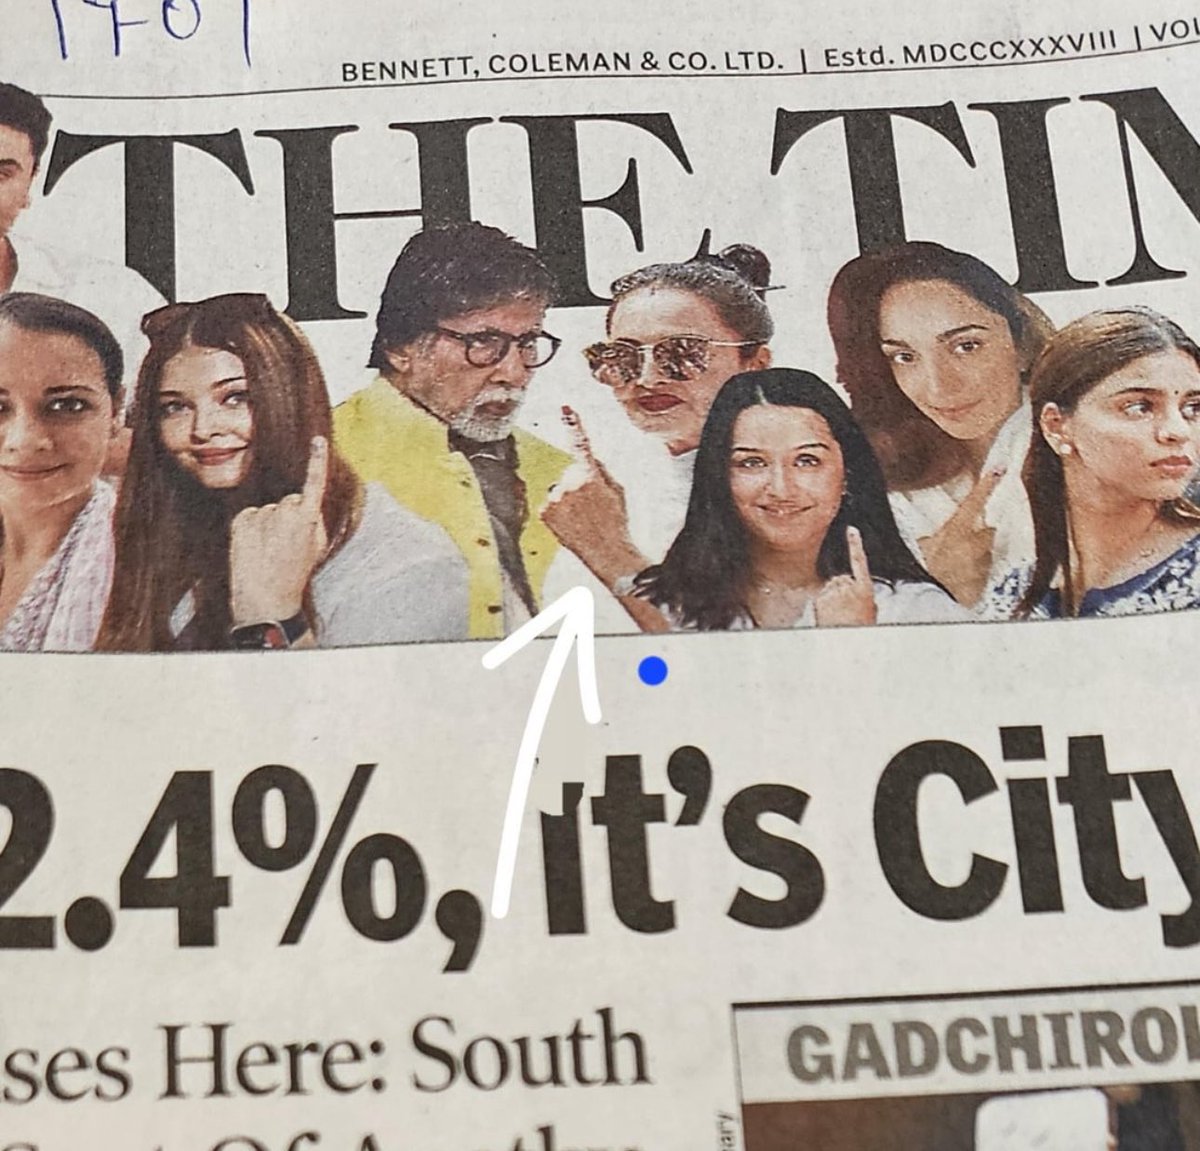 Times of India got no chill 😭😭😭